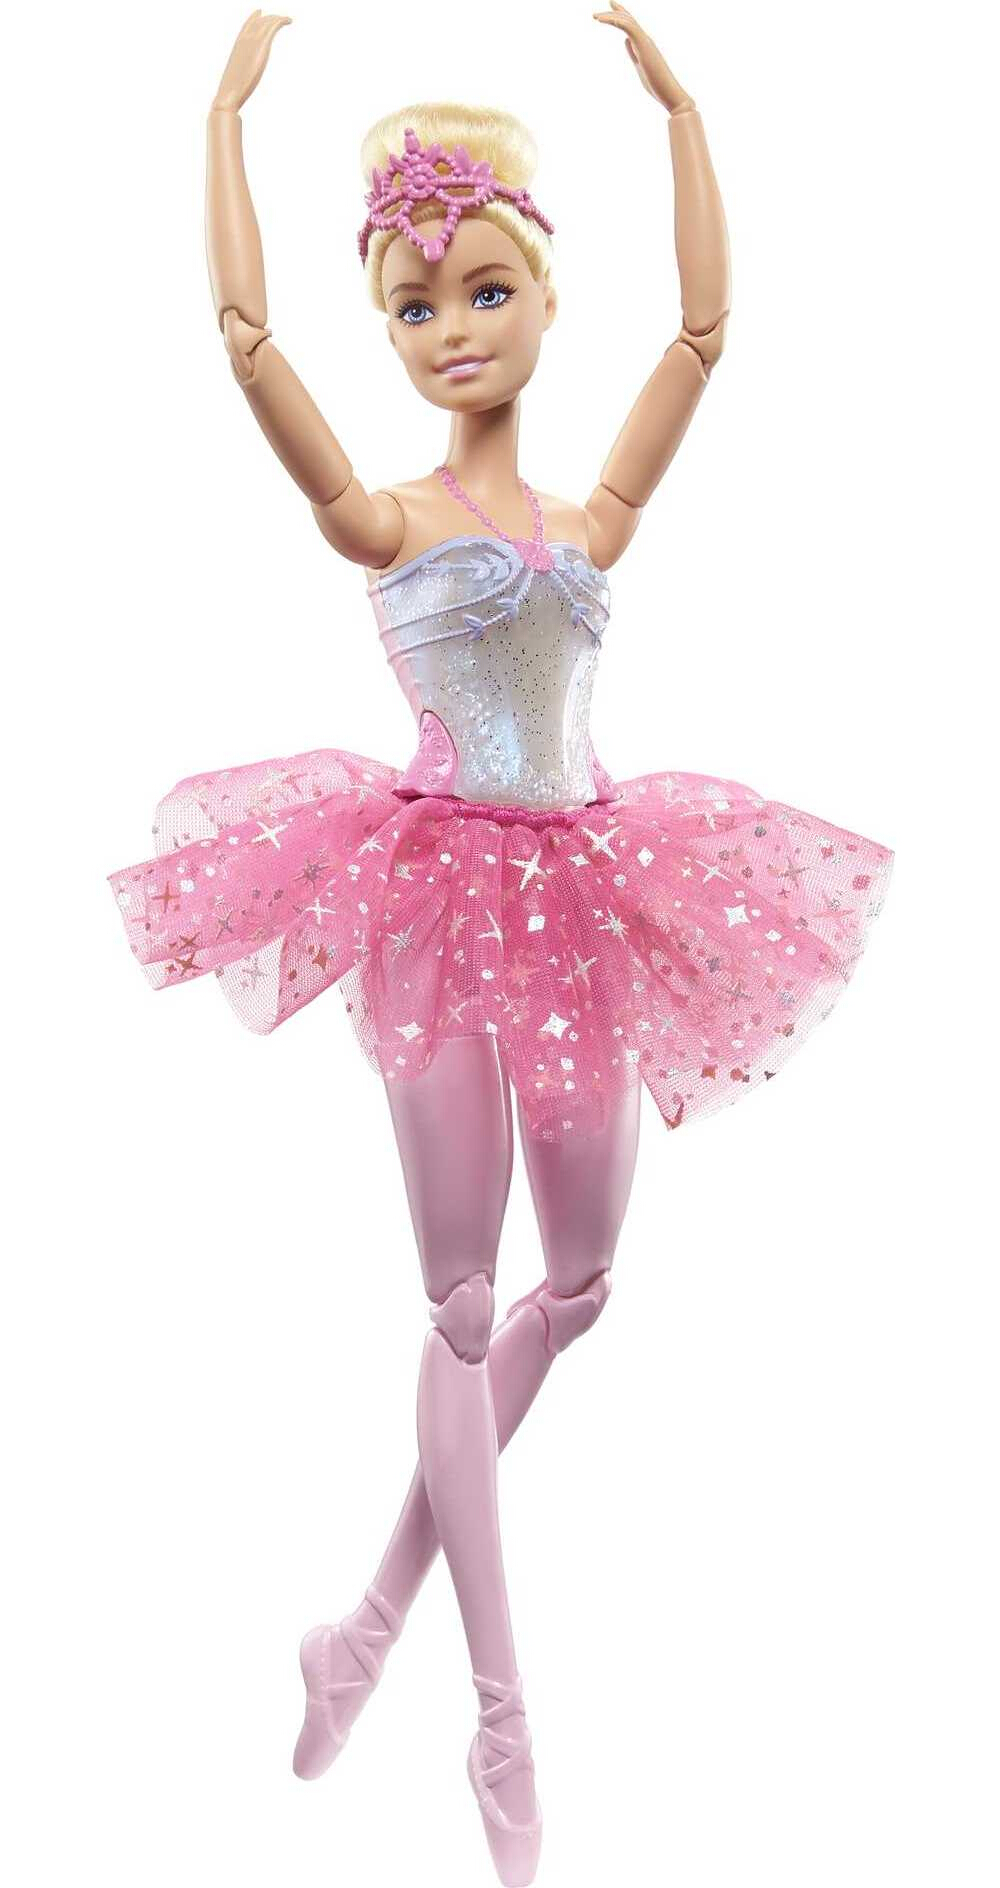 Barbie Dreamtopia Twinkle Lights Ballerina Doll, 11.7 in Blonde with ...